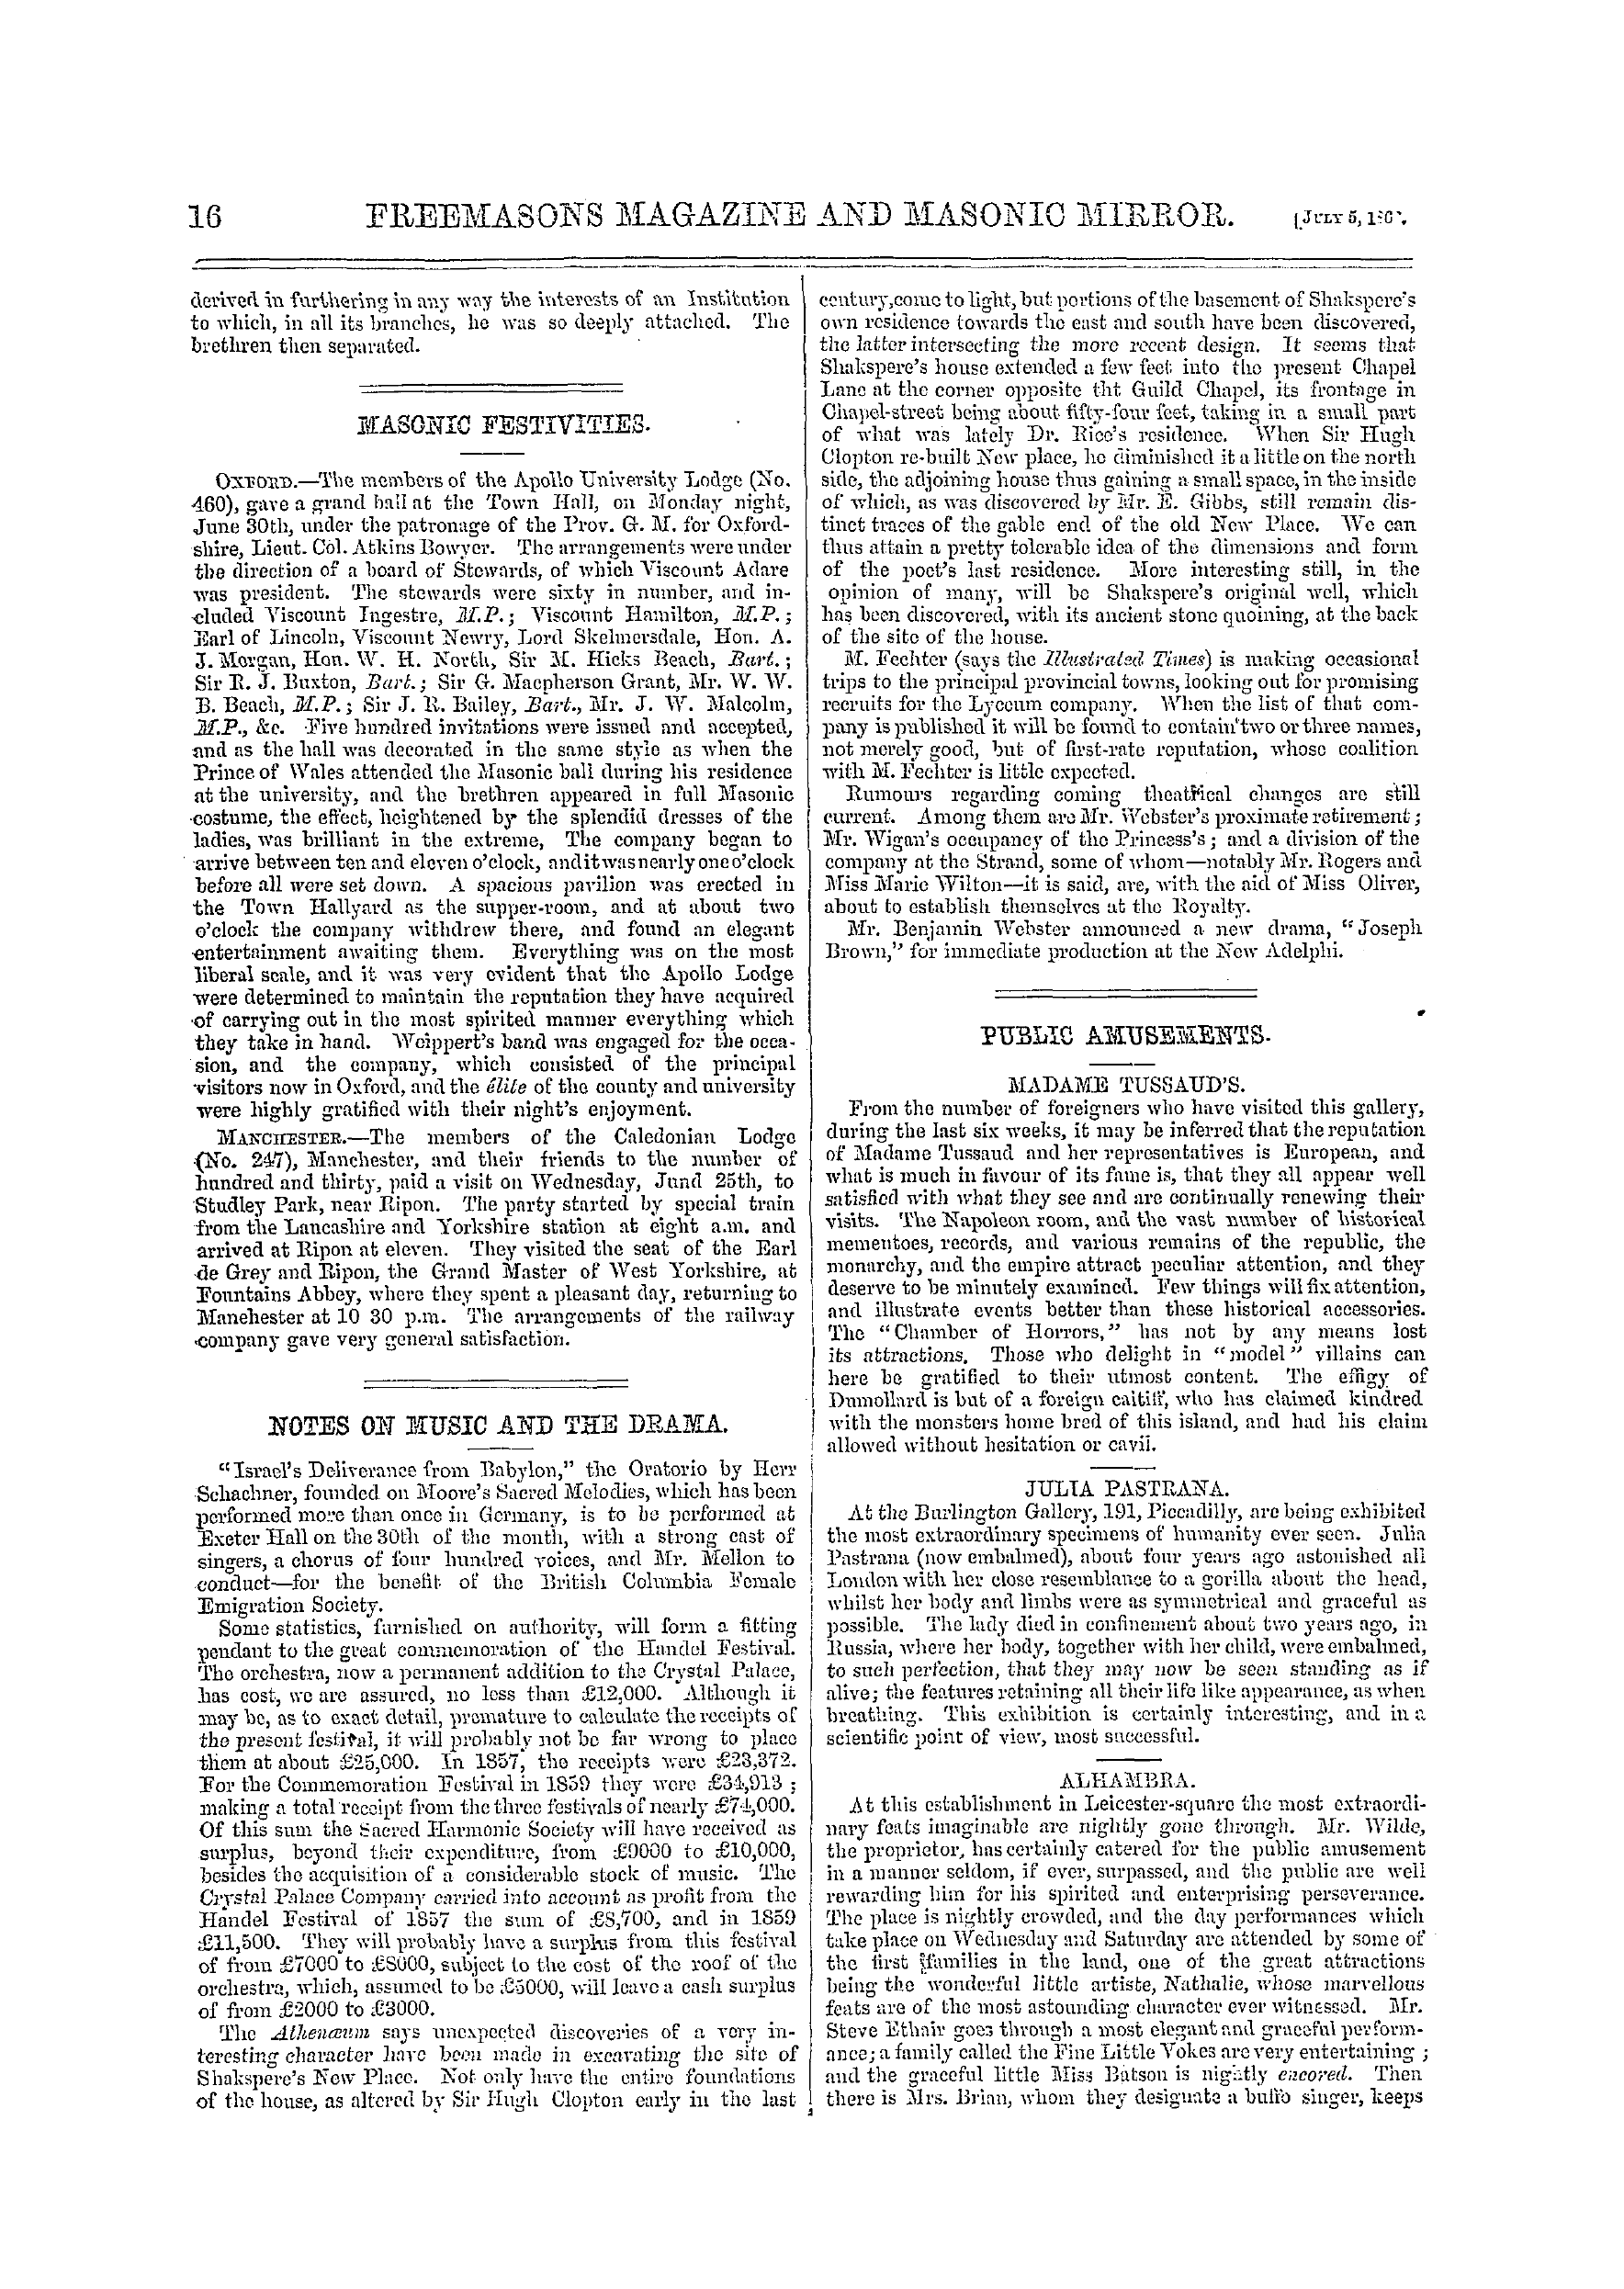 Page 23